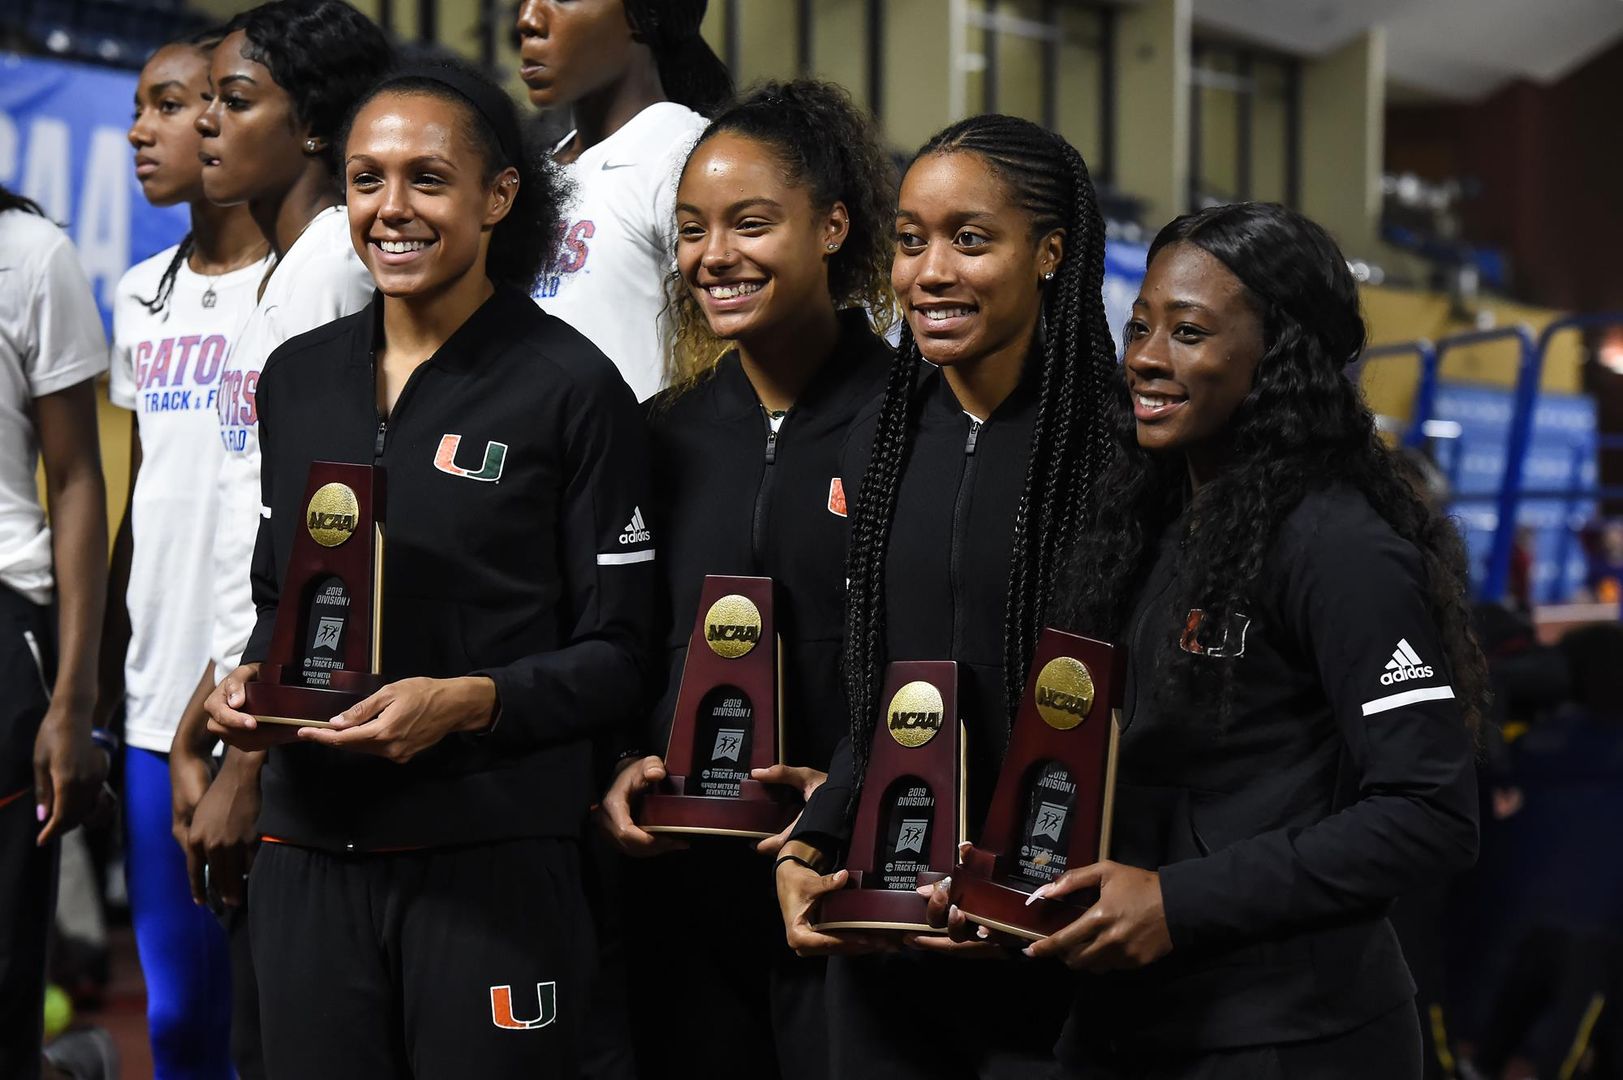 Miami's 4x400m Relay Team Finishes 7th at NCAAs